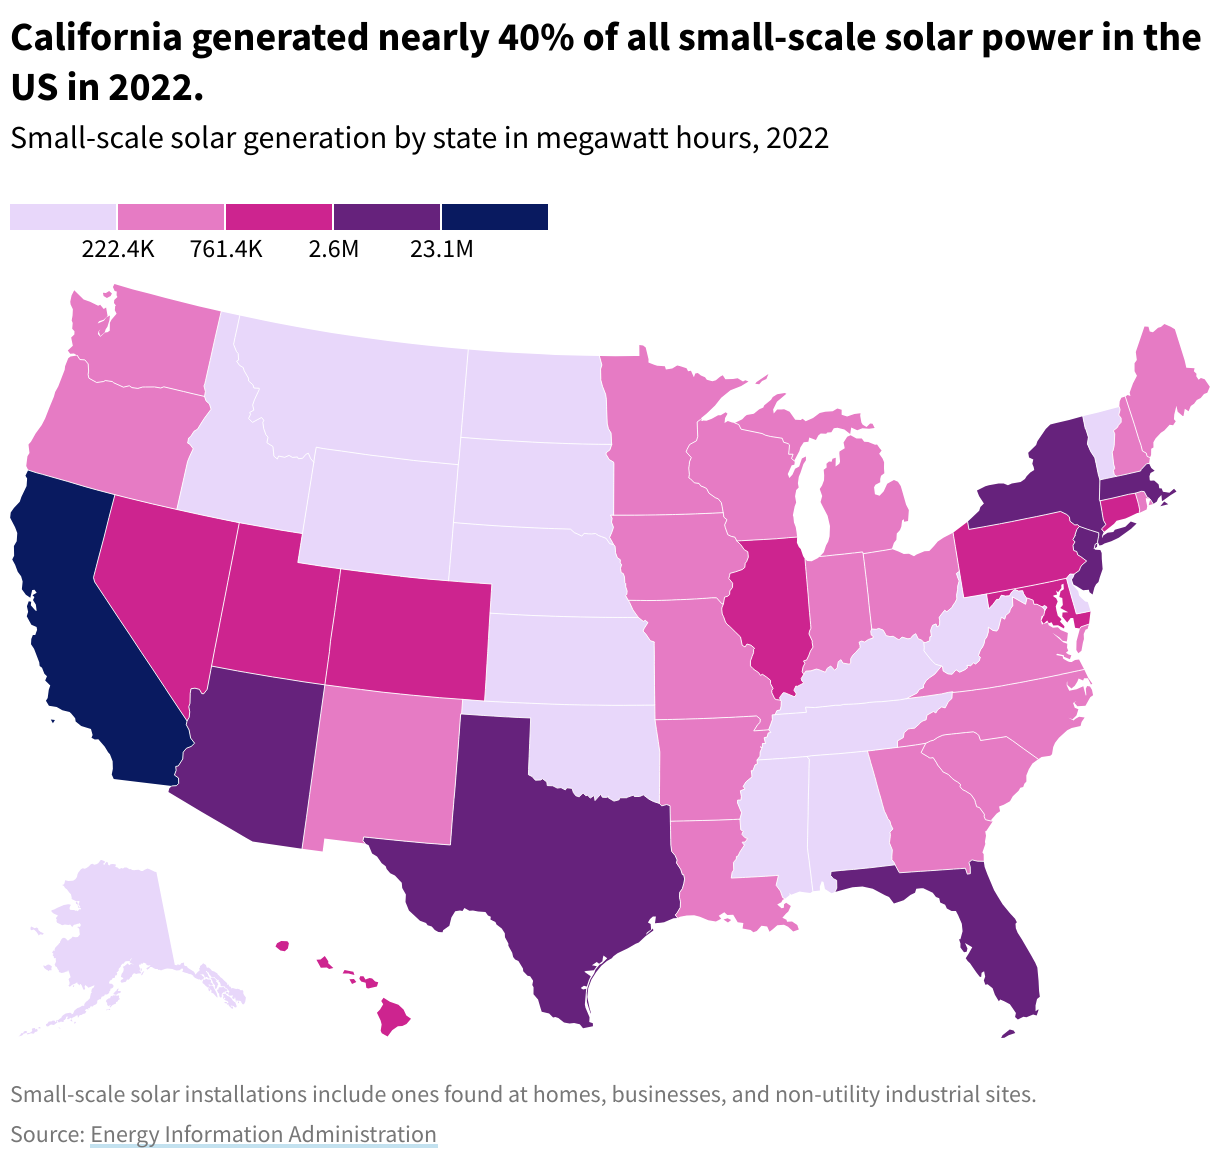 Map showing that california is significantly darker than any other state, indicating much higher solar generation. Arizona, Texas, New York, and New Jersey are next highest.